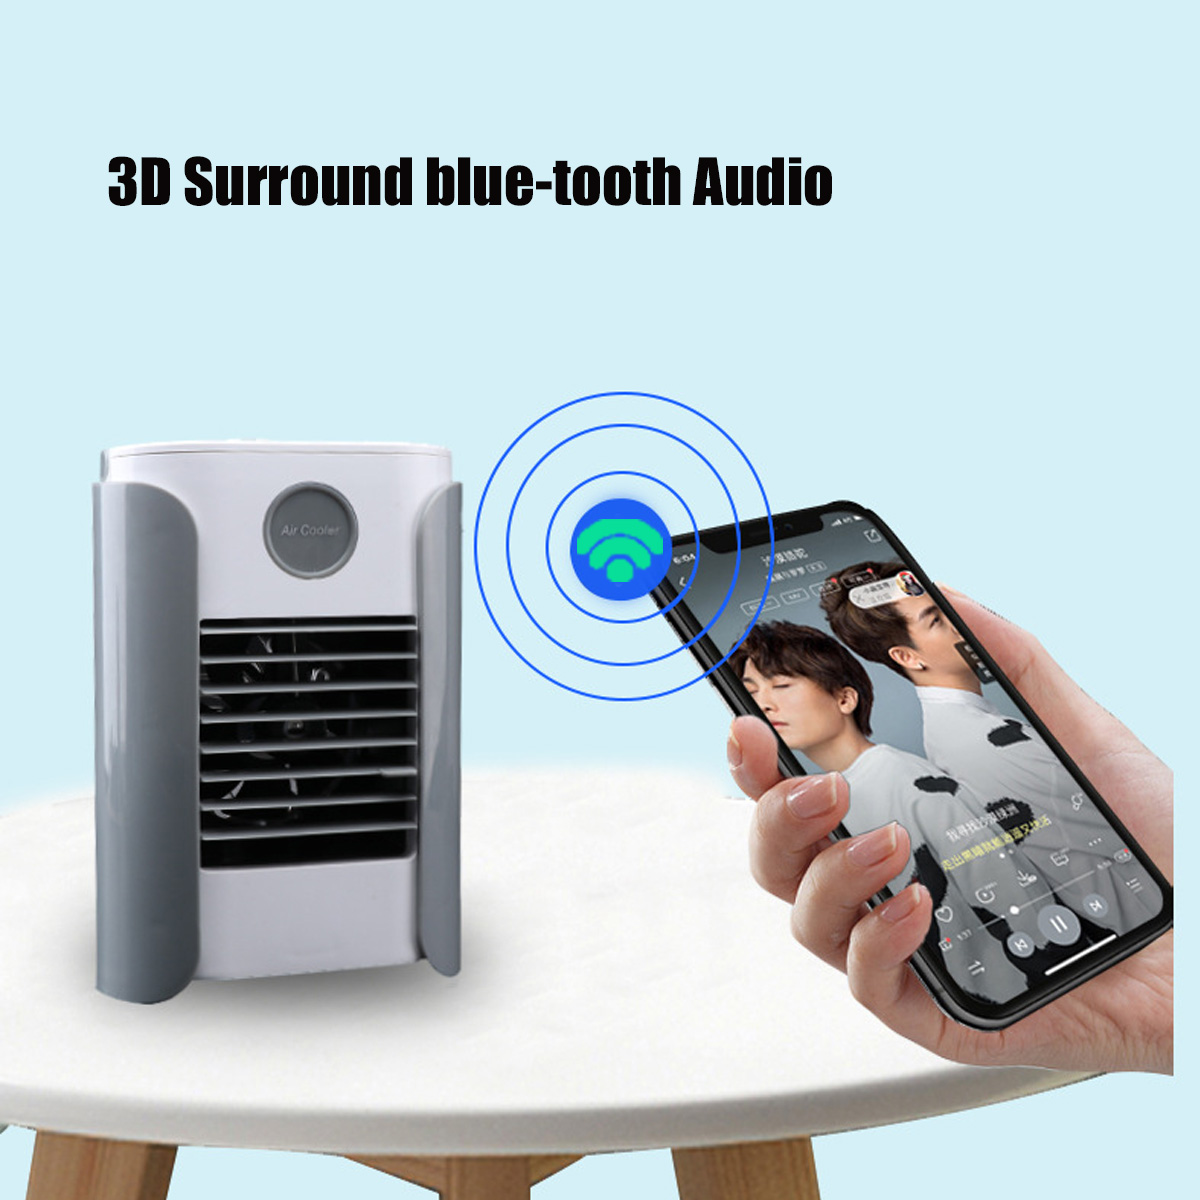 USB-Multifunction-Humidifier-Portable-Air-Conditioner-Fan-Cooling-bluetooth-Speaker-Gifts-for-Family-1675300-10